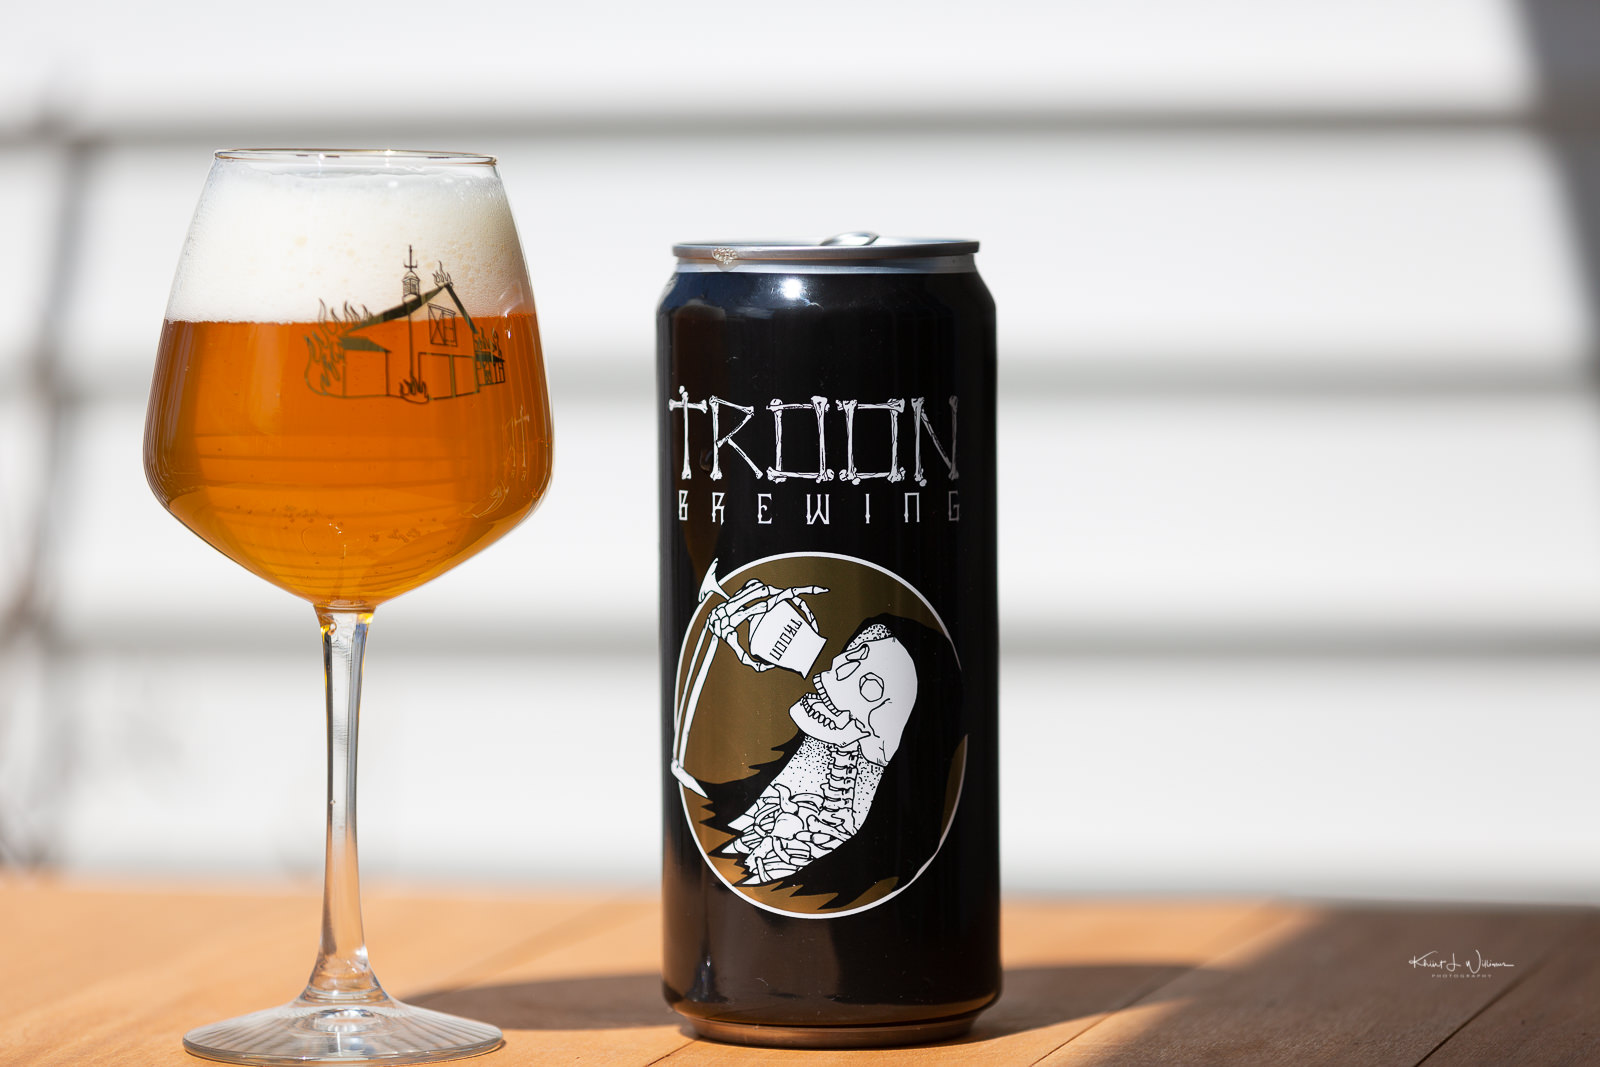 Troon Brewing's Neither Pine nor Apple: Discuss